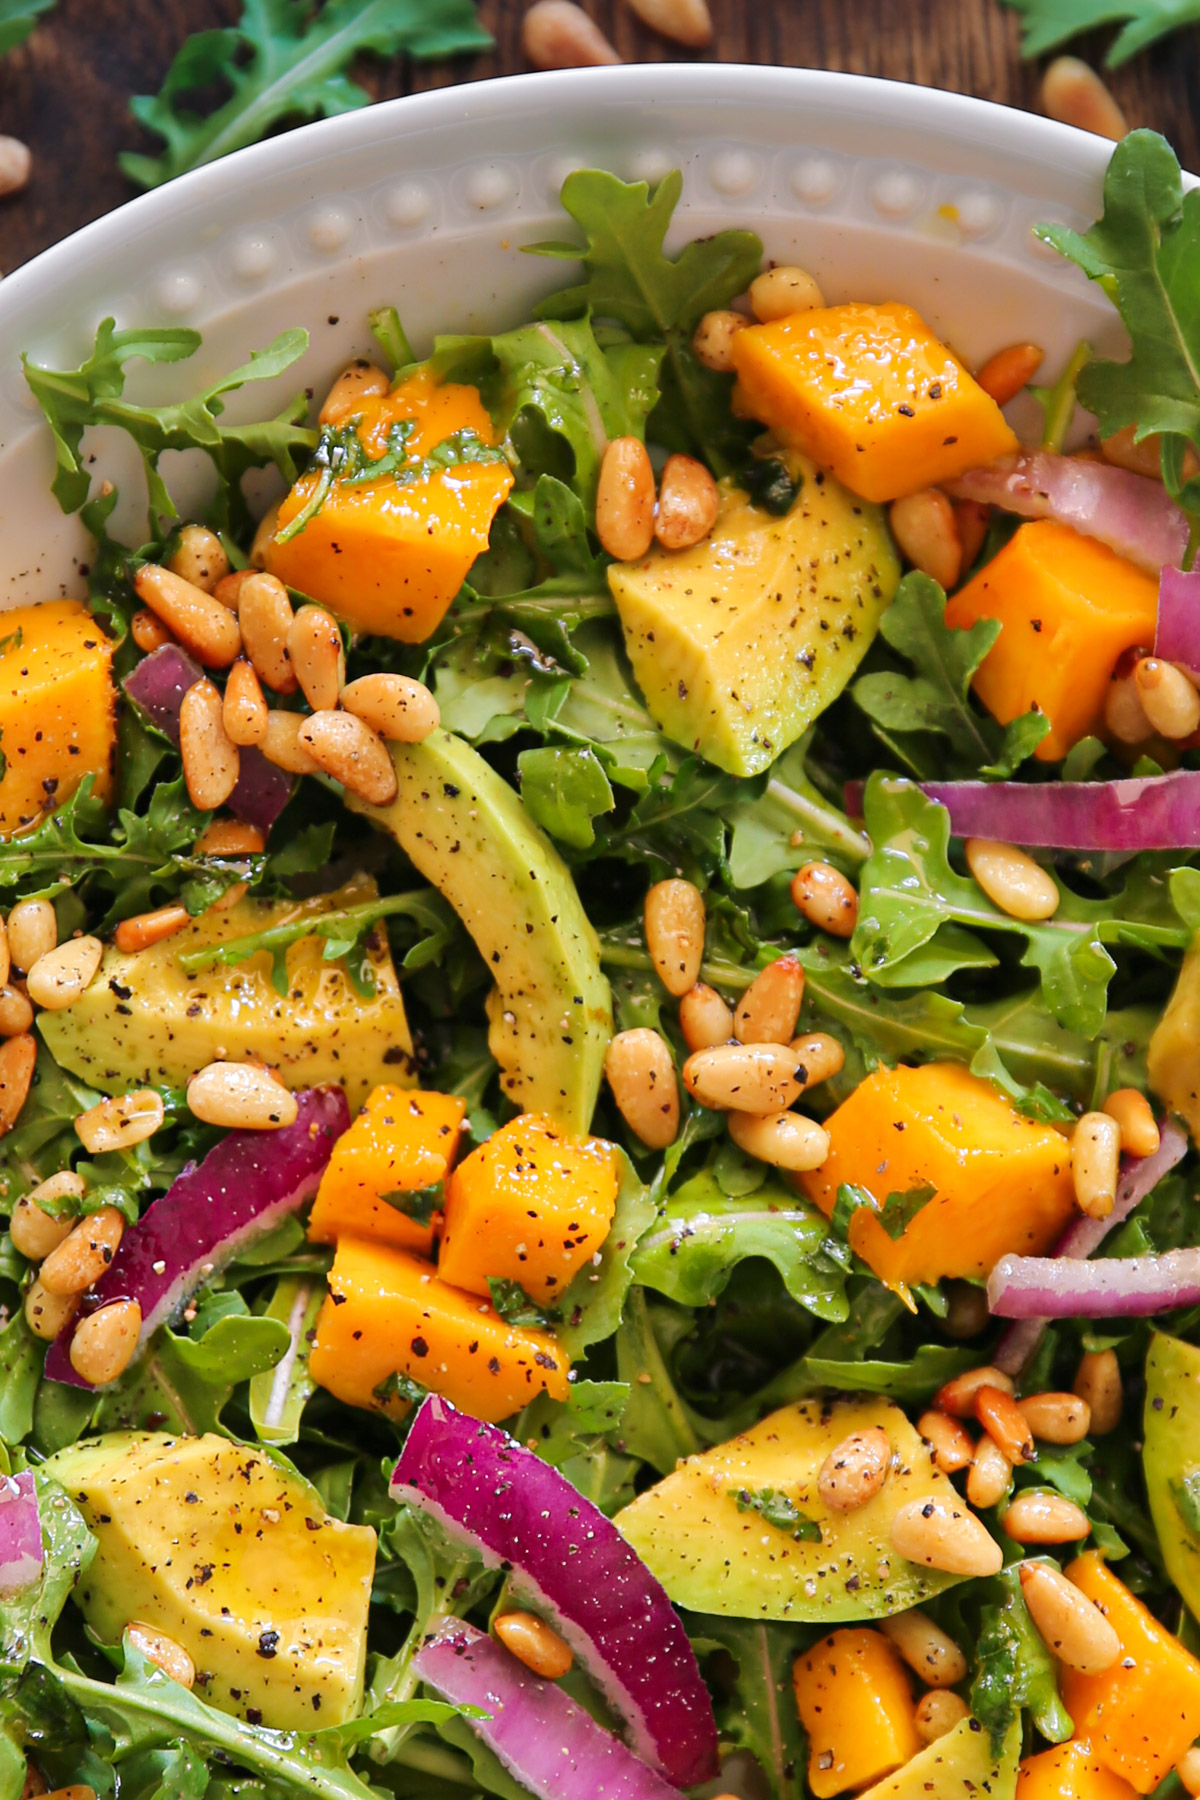 Avocado Mango Salad with Arugula, Pine Nuts, and Honey-Lime Dressing - in a white bowl (close-up photo).